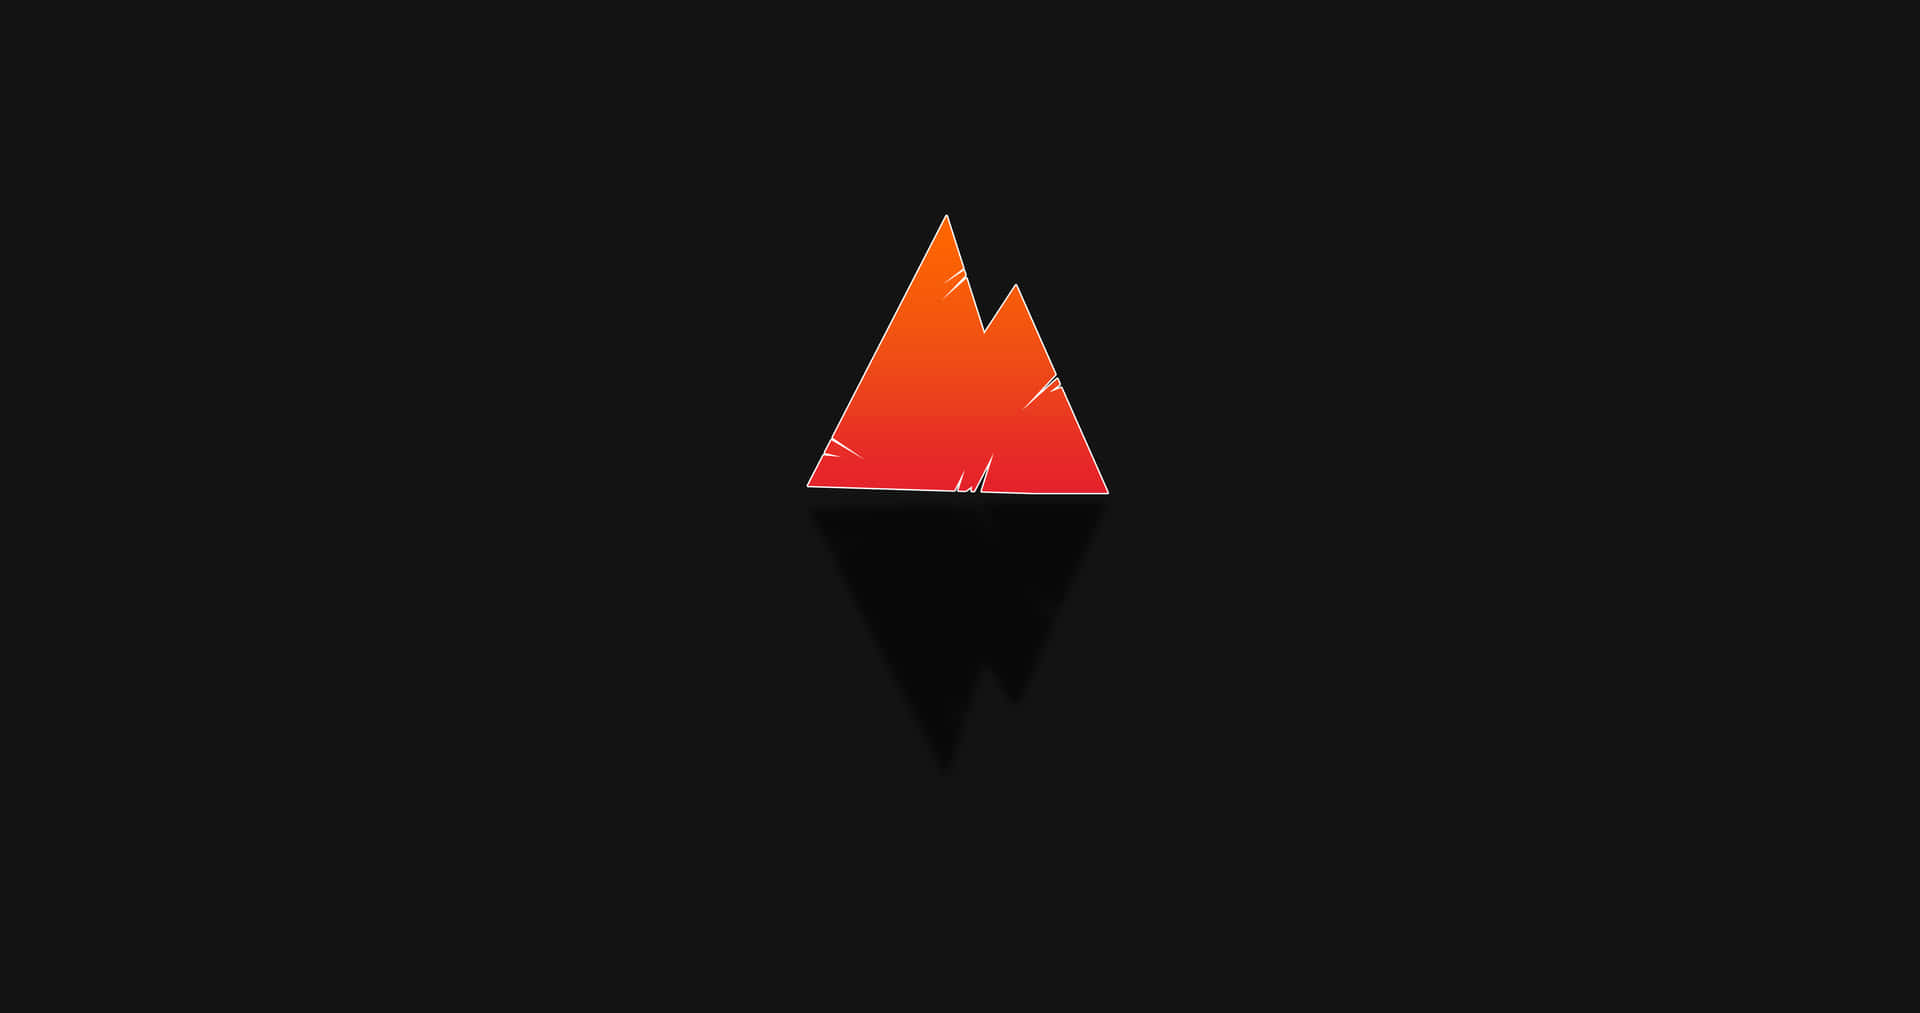 Download A Fire Logo On A Black Background Wallpaper | Wallpapers.com